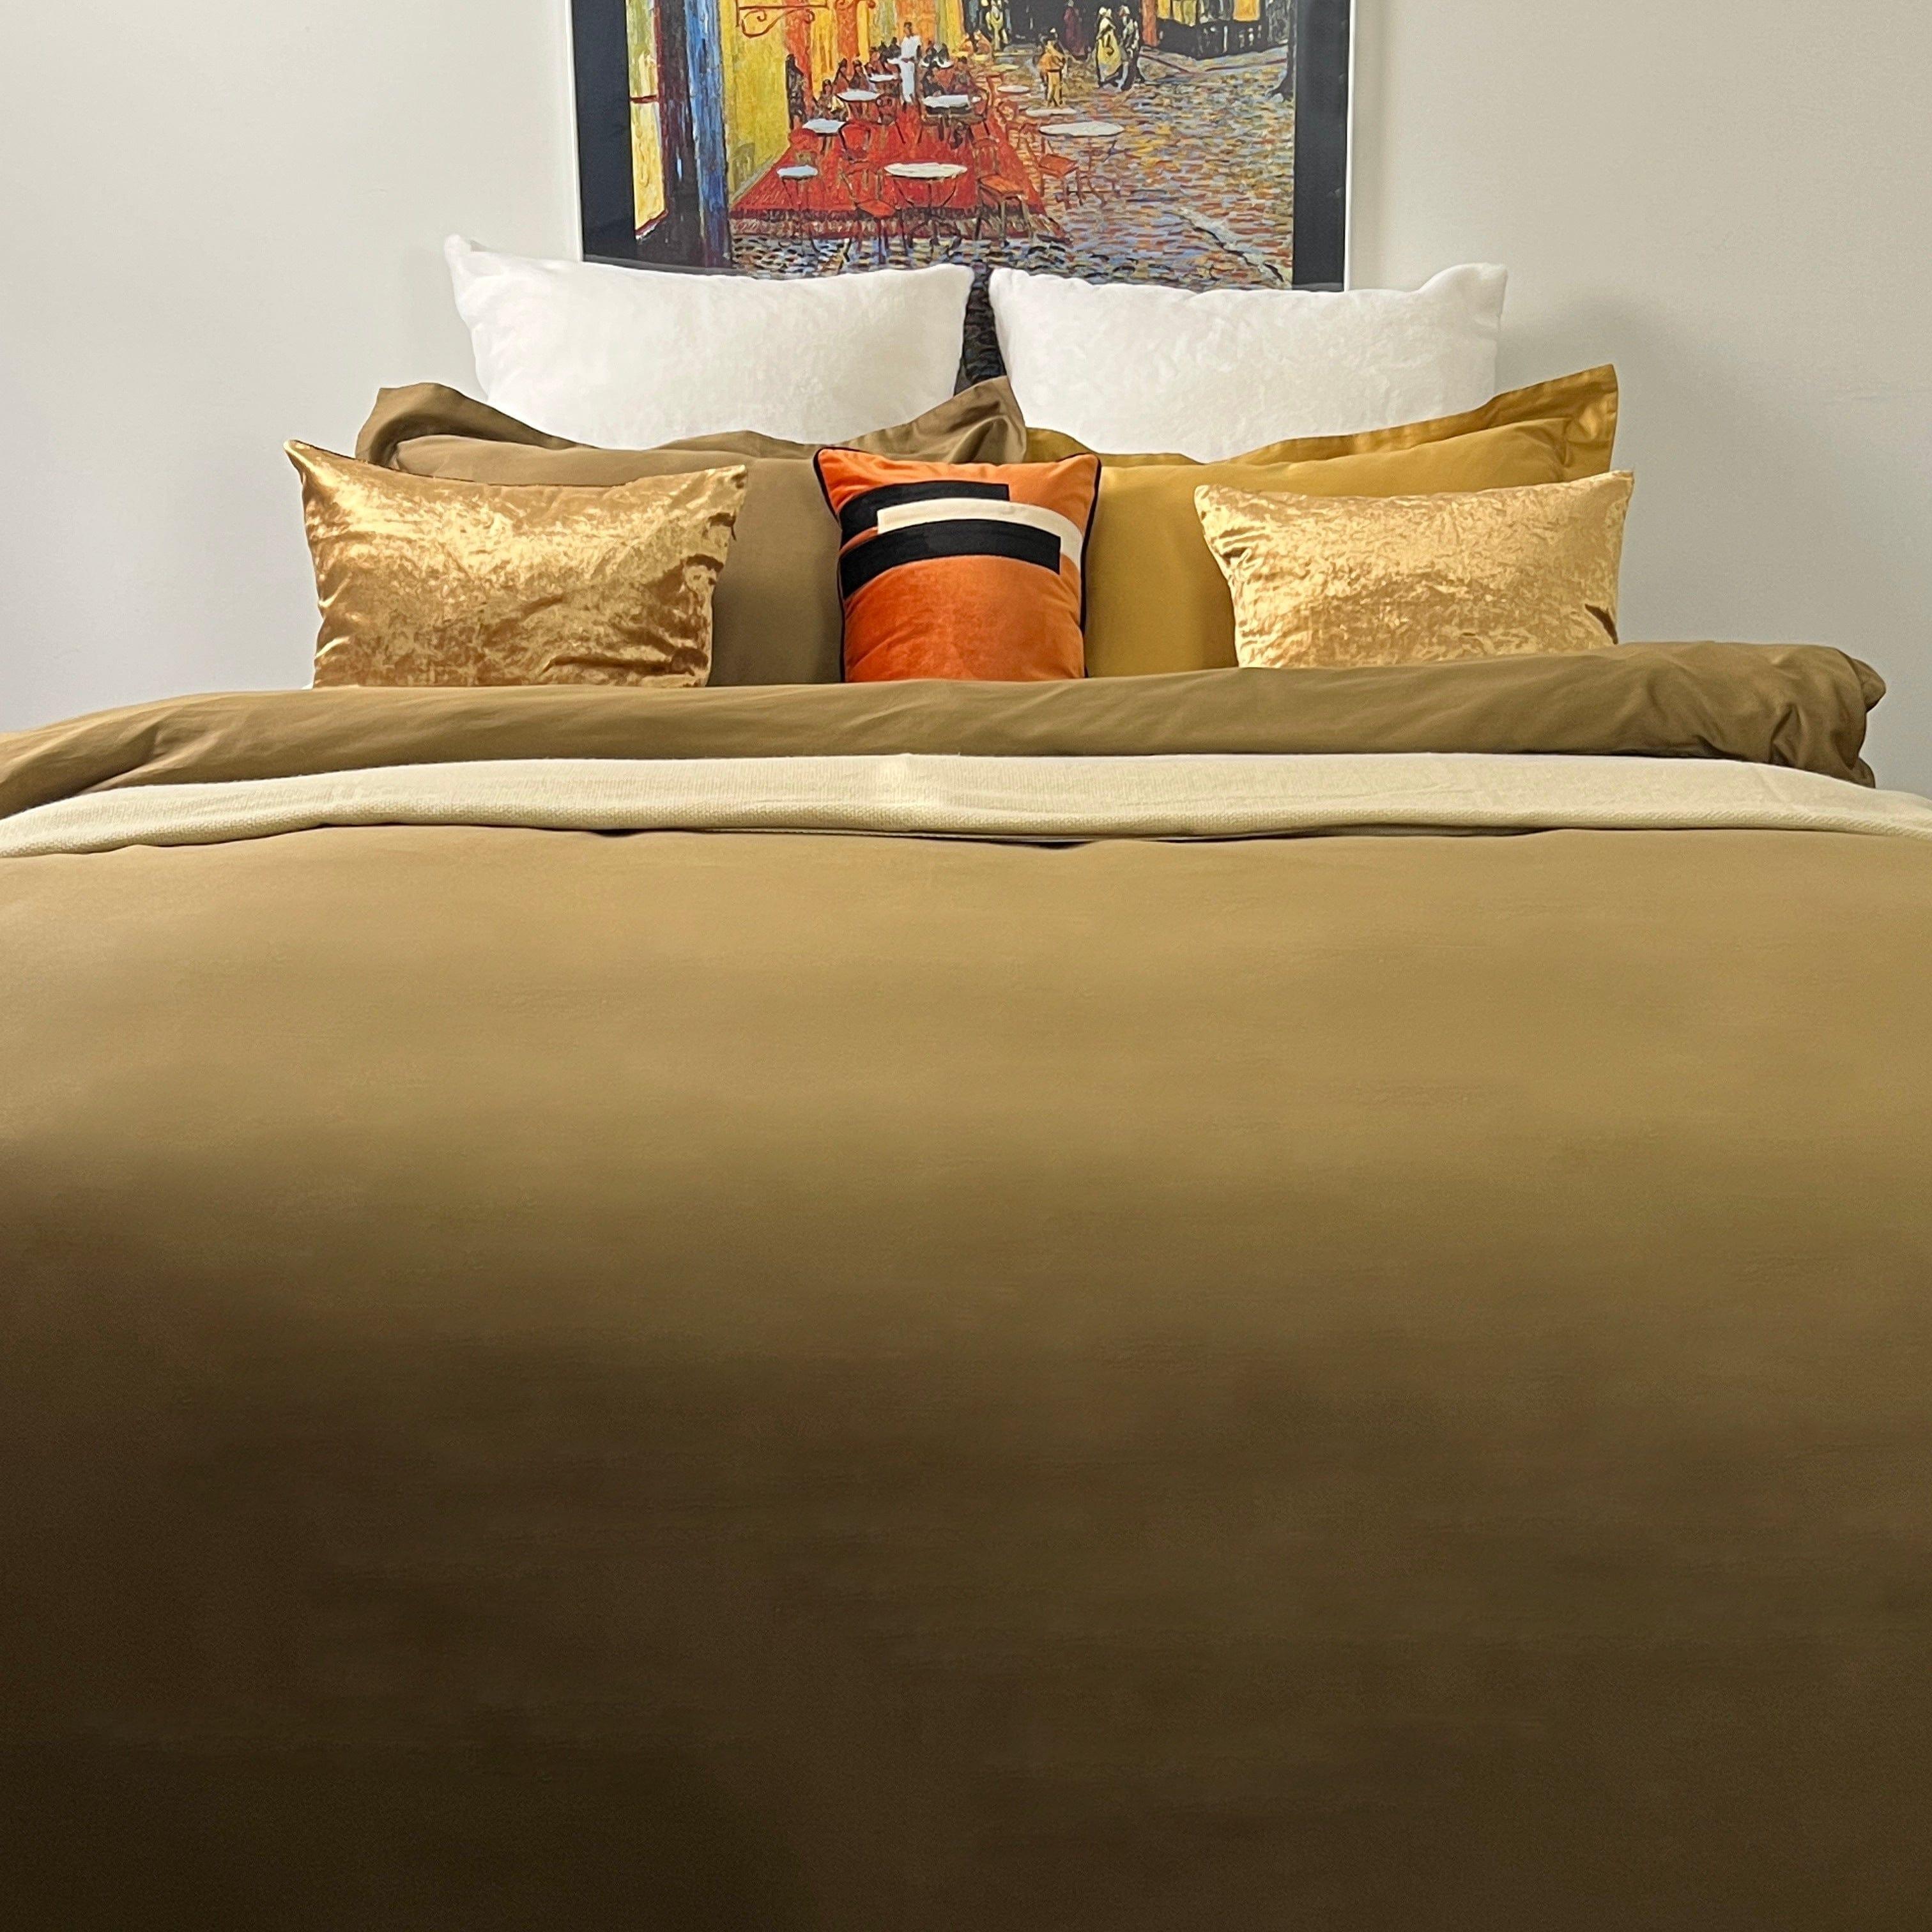 Beddley duvet cover review: Is the Beddley Easy-Change cover worth it? -  Reviewed